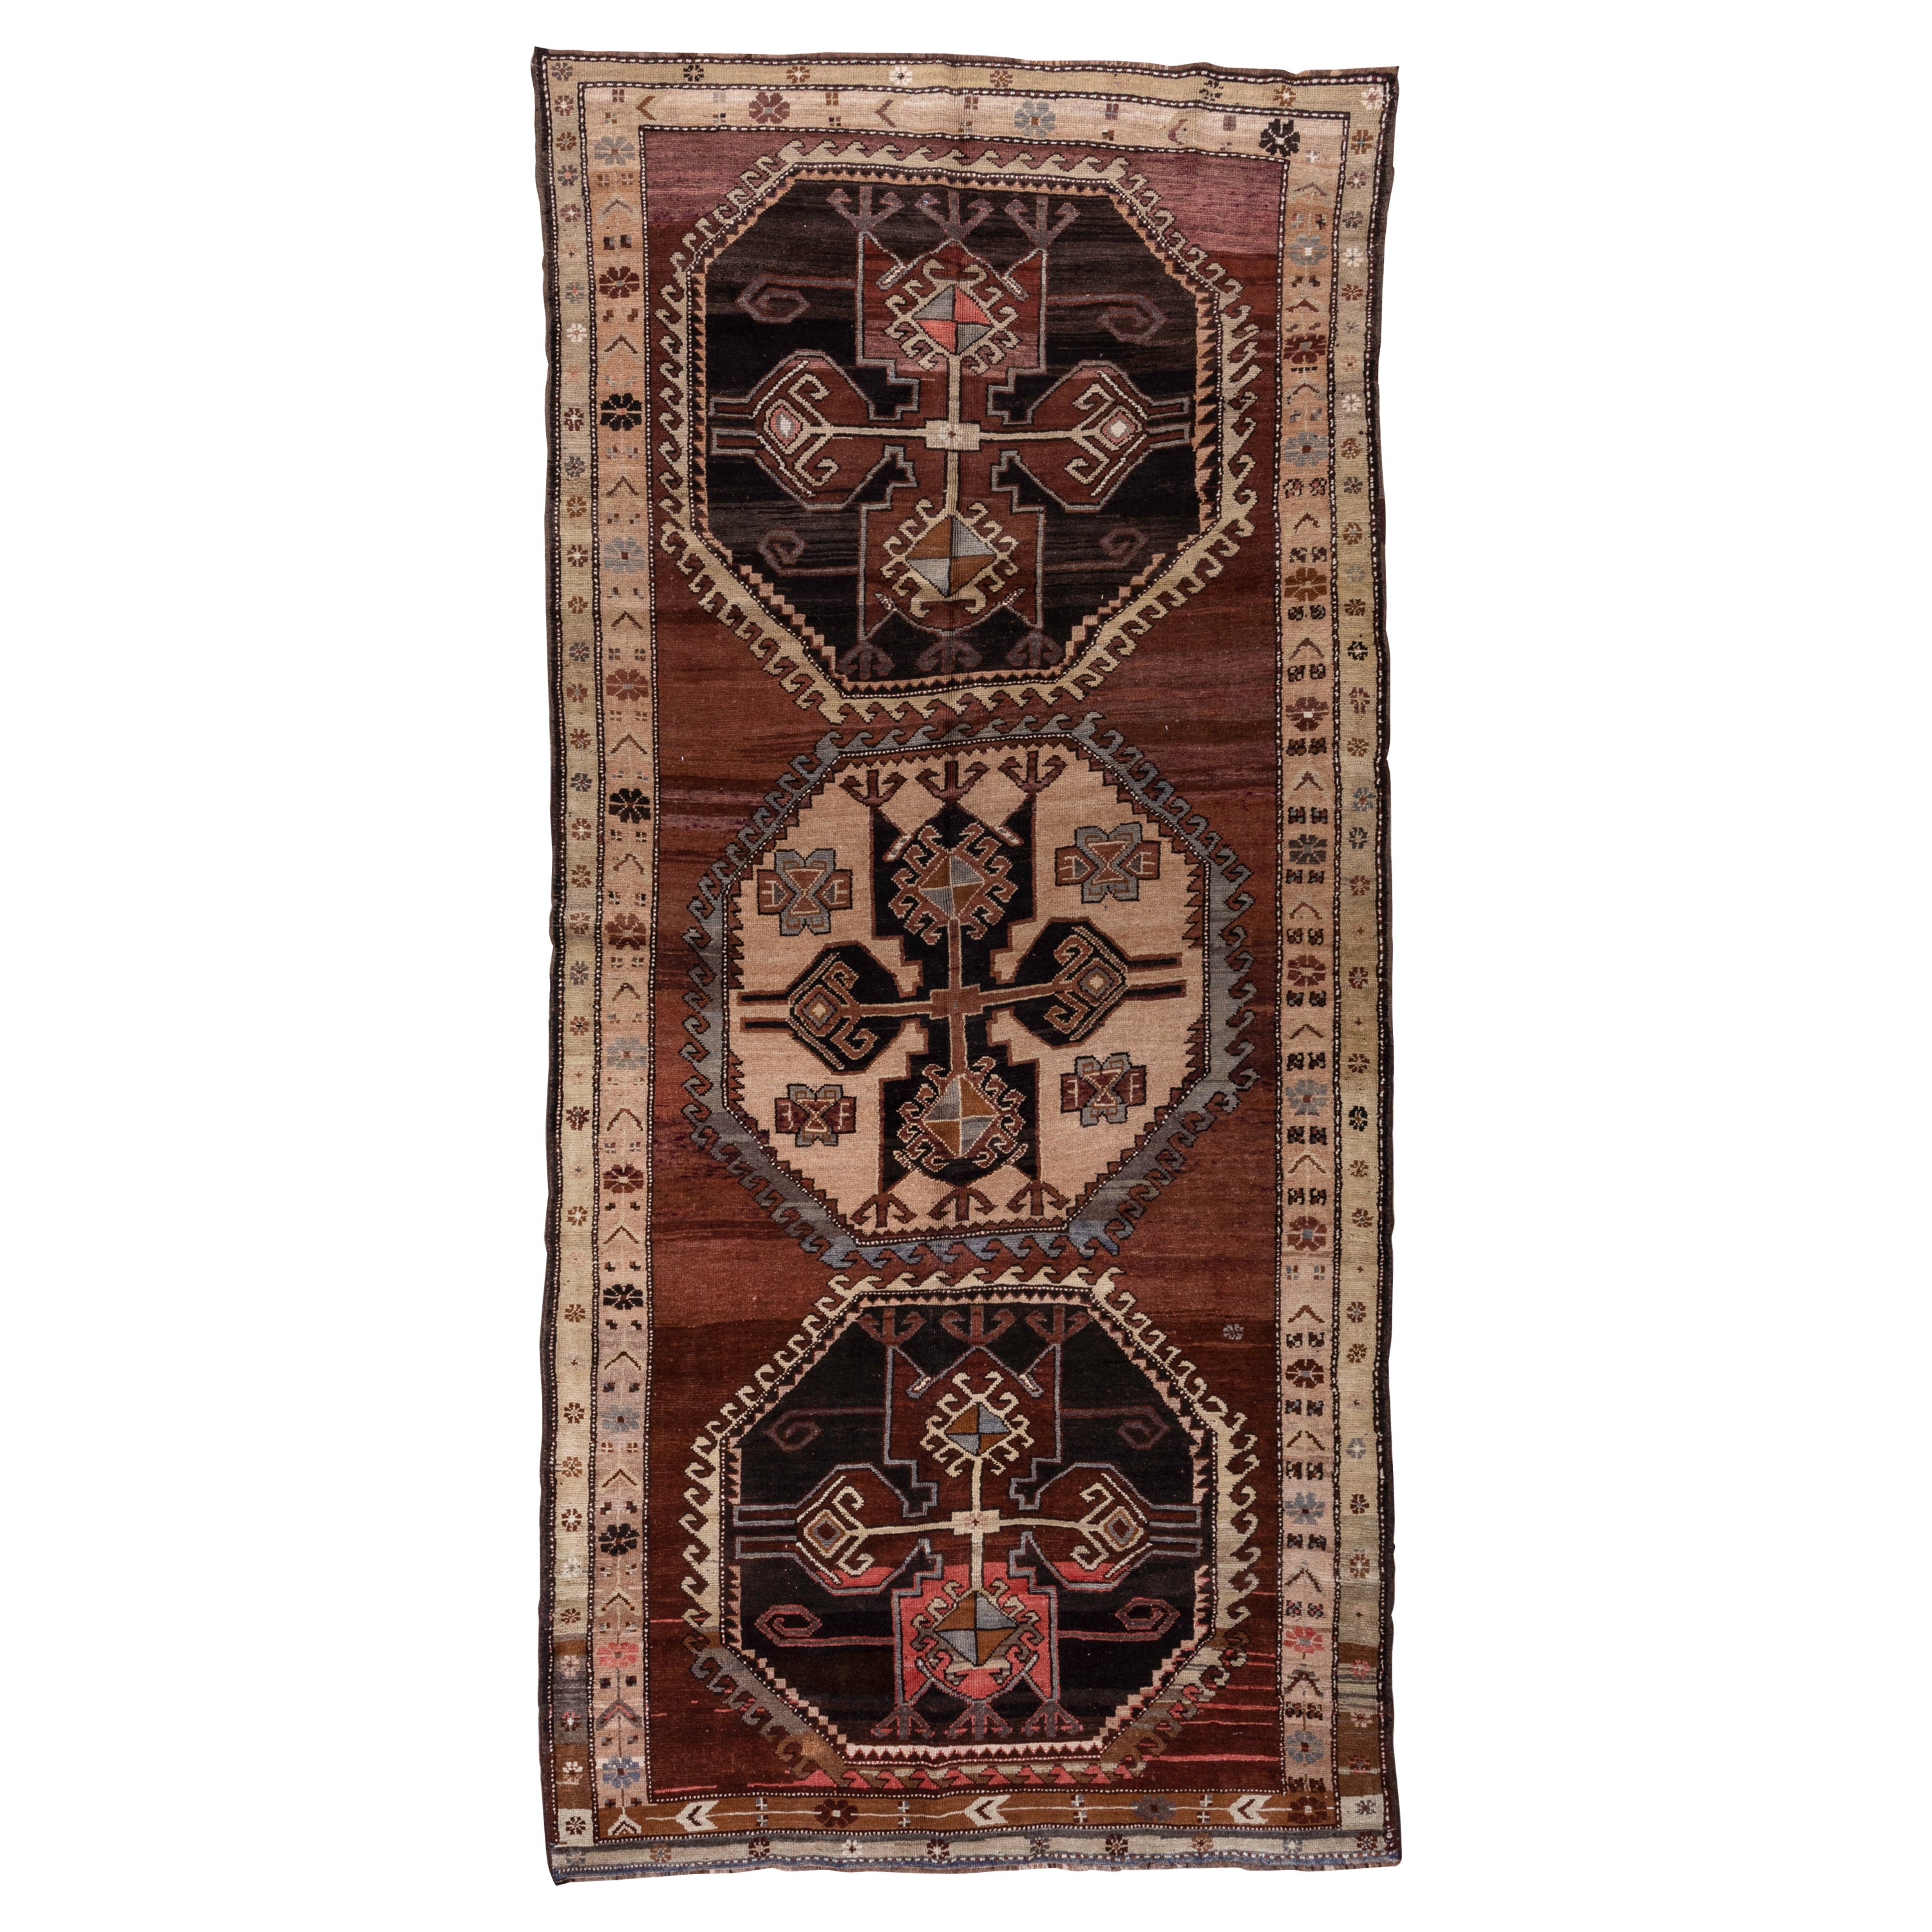 Mid 20th Century Turkish Kars Gallery Rug, Rustic Palette, Colorful Accents